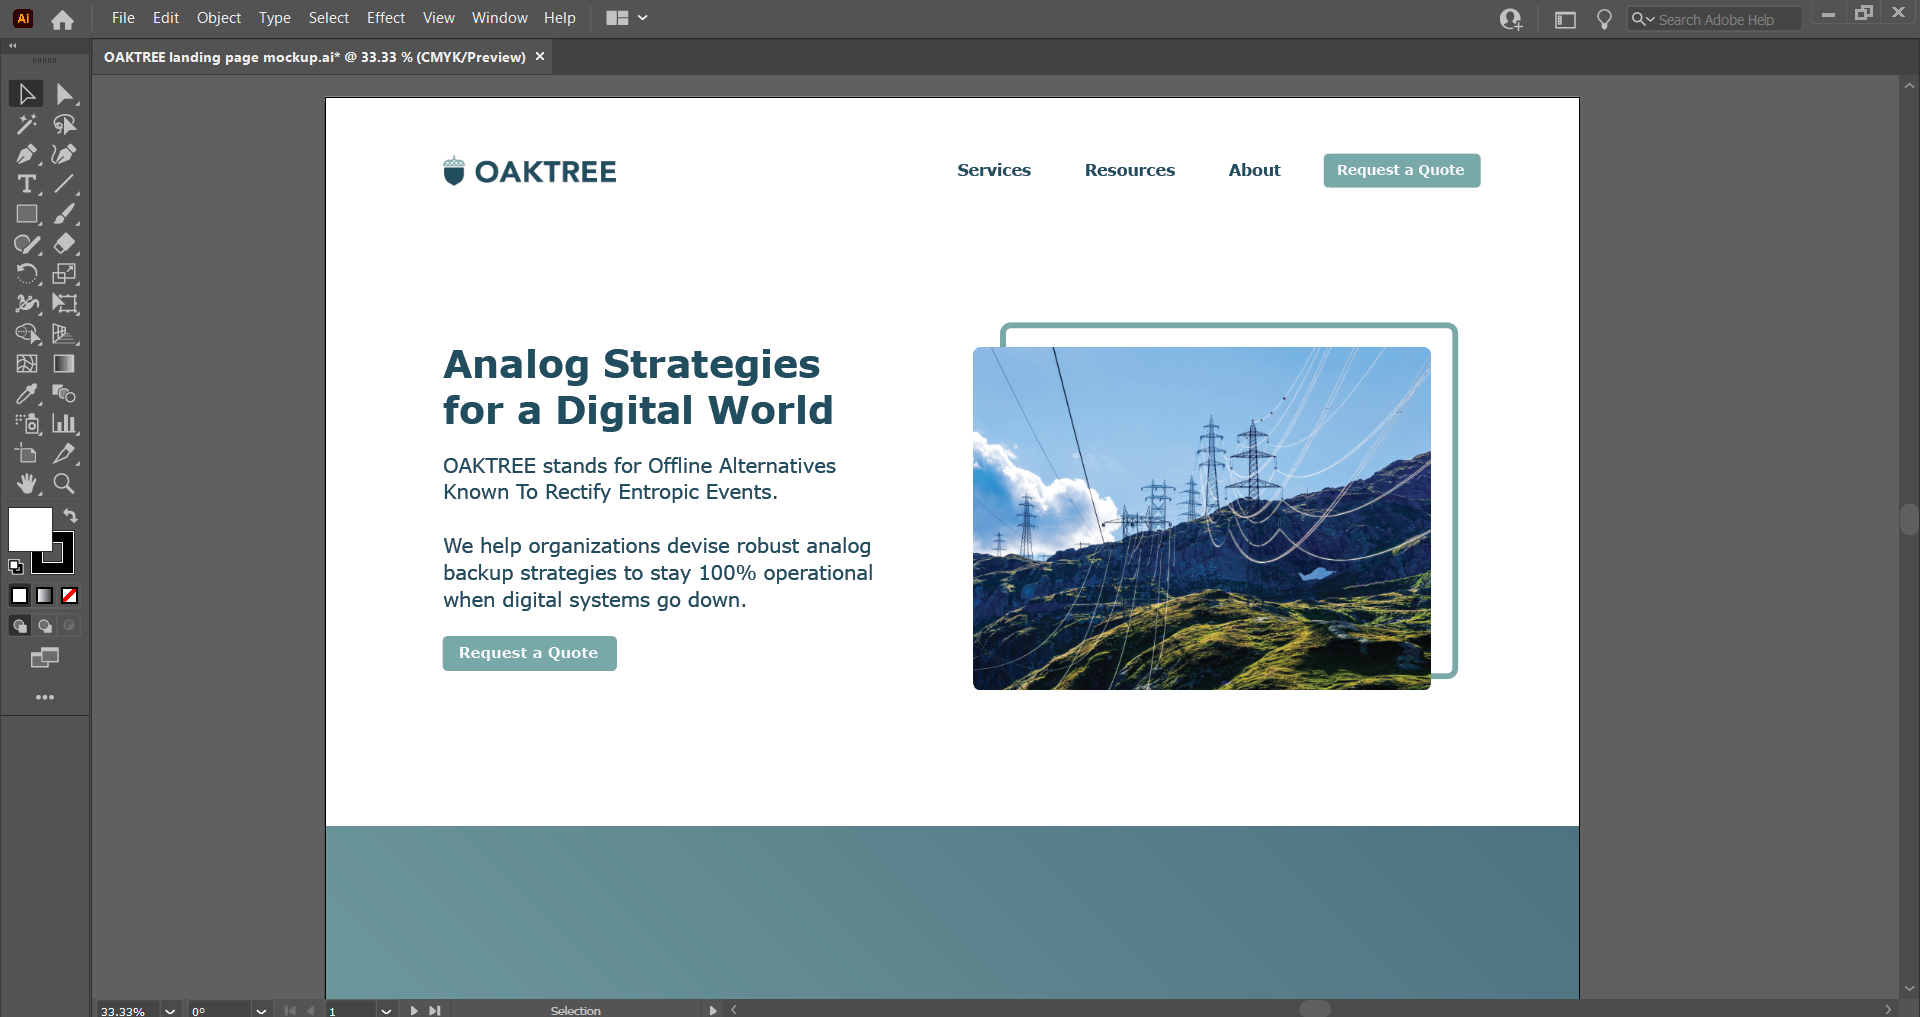 A screenshot of the mockup landing page of OAKTREE within Adobe Illustrator.